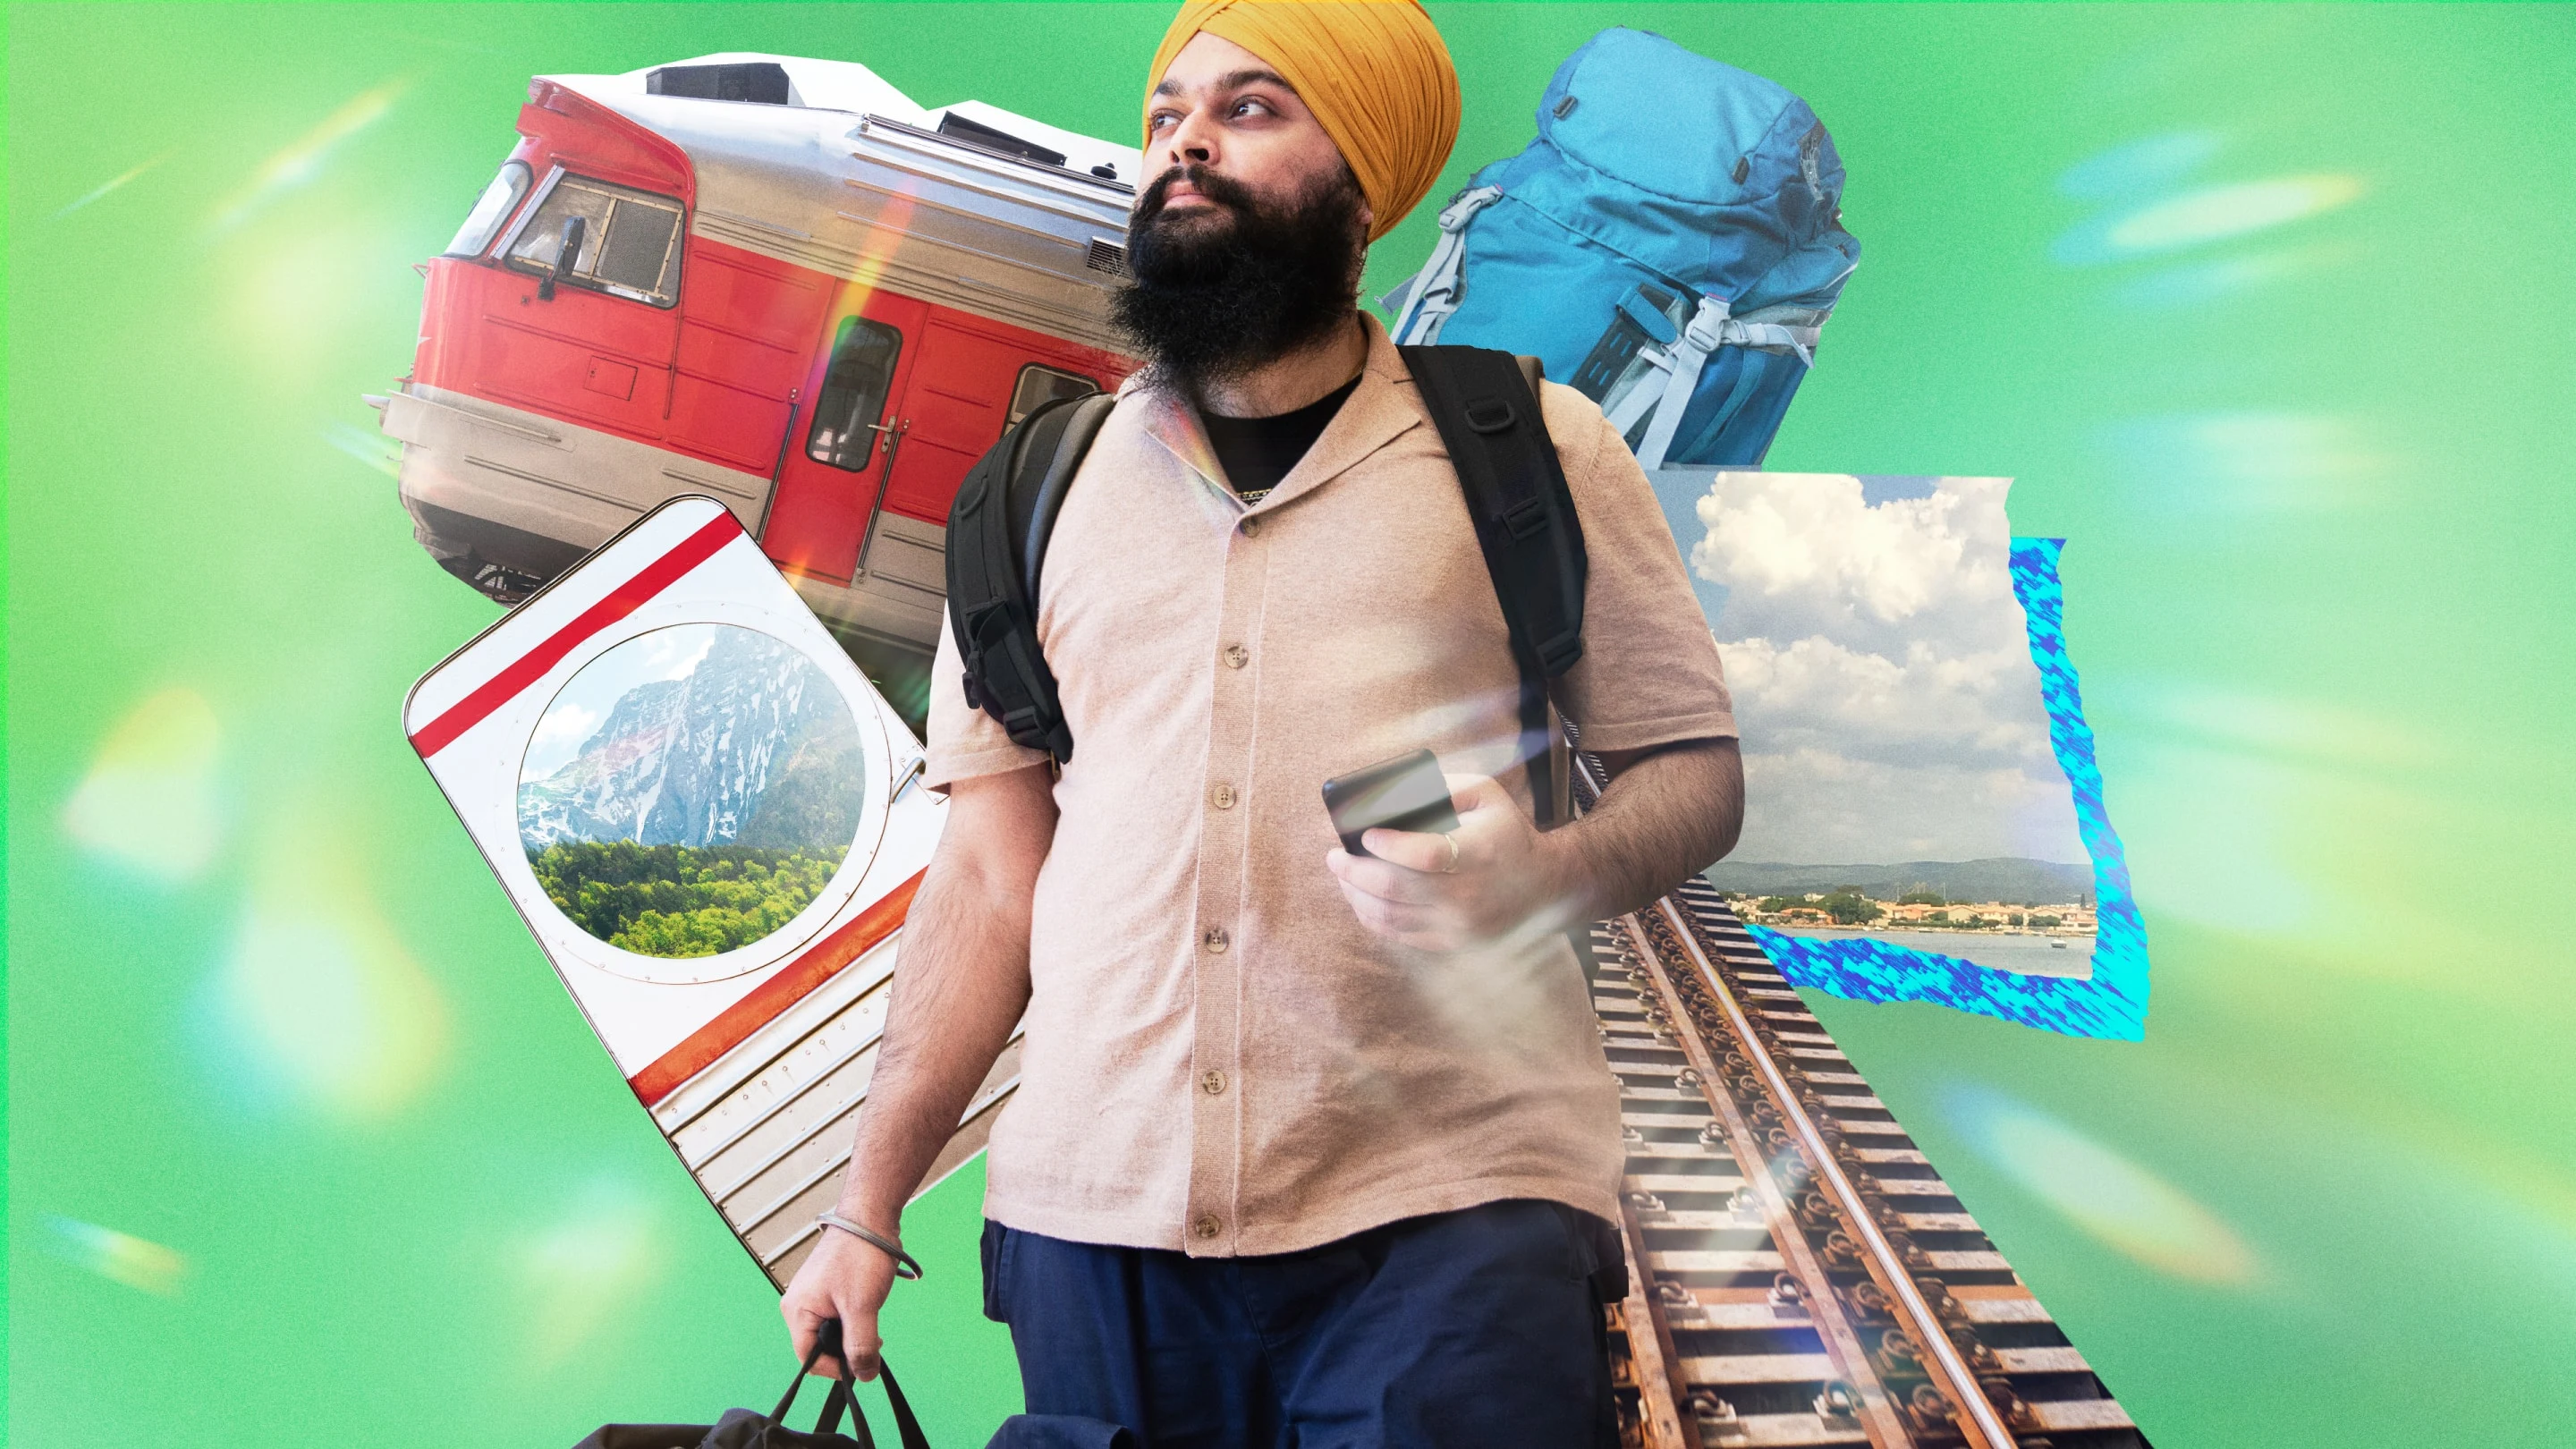 Collage featuring a Sikh man wearing a backpack, surrounded by deconstructed train tracks, a window view of a mountainscape and the end carriage of a passenger train.